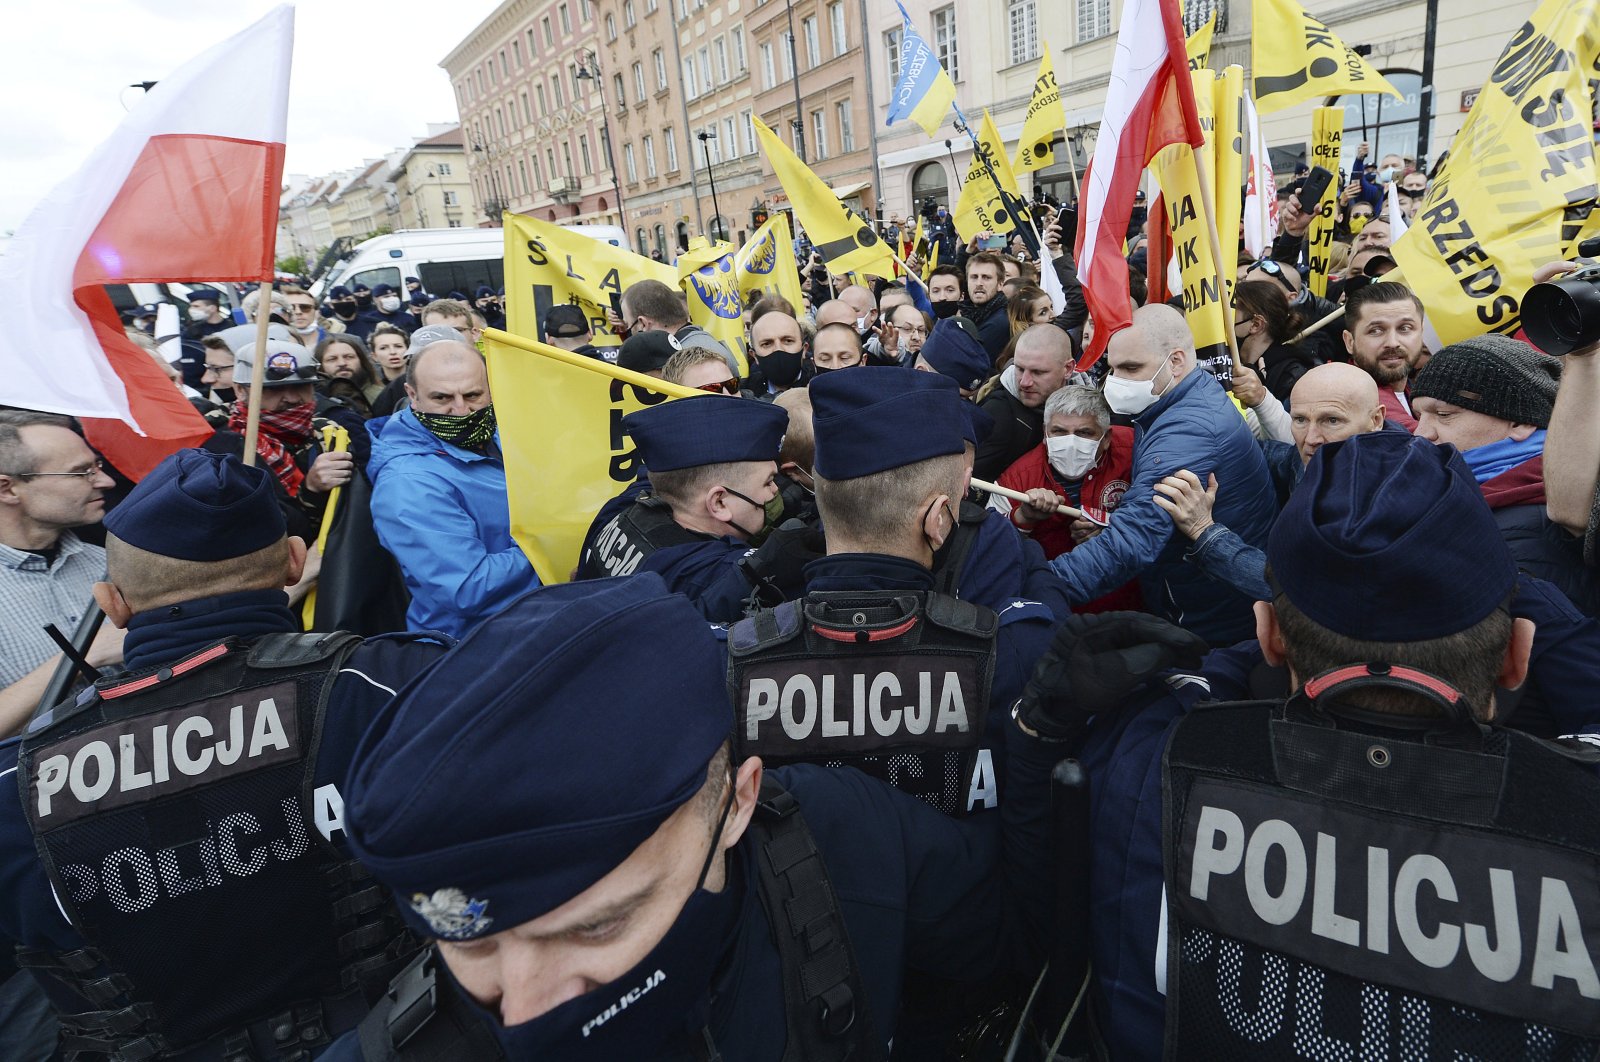 Police clash with protesters demanding an end to economic restrictions during the coronavirus pandemic in Warsaw, Poland, Saturday, May 16, 2020. (AP Photo)